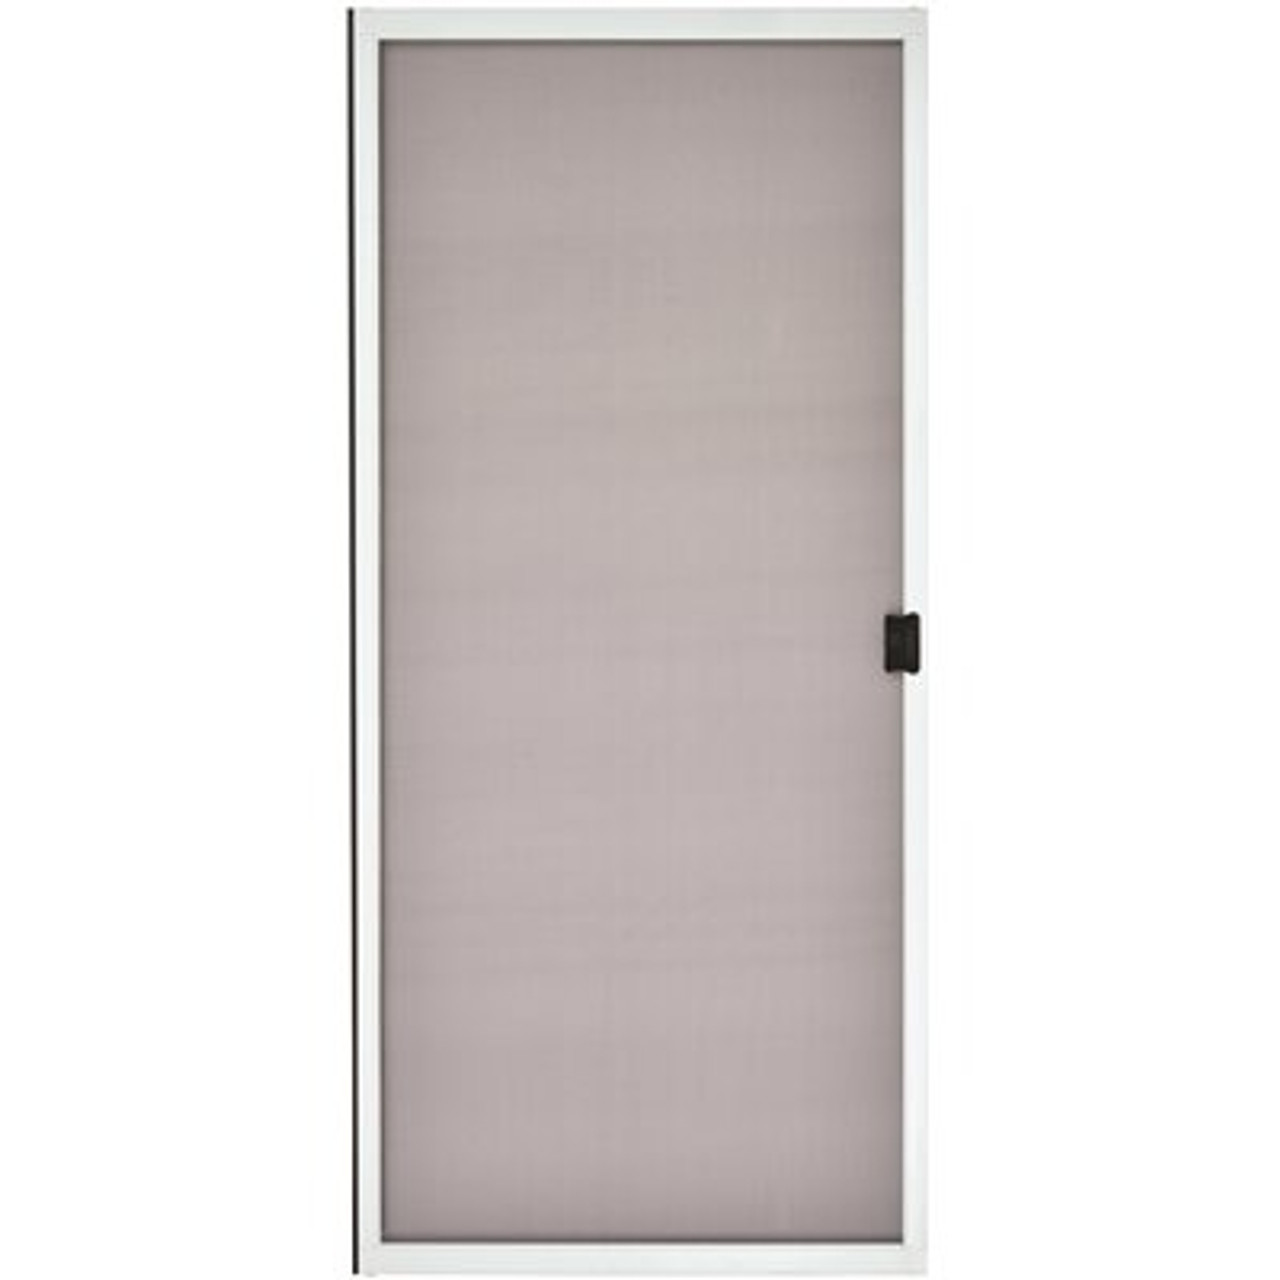 PRIVATE BRAND UNBRANDED 48" x 78-80" Sliding Screen Door White, Package of 5